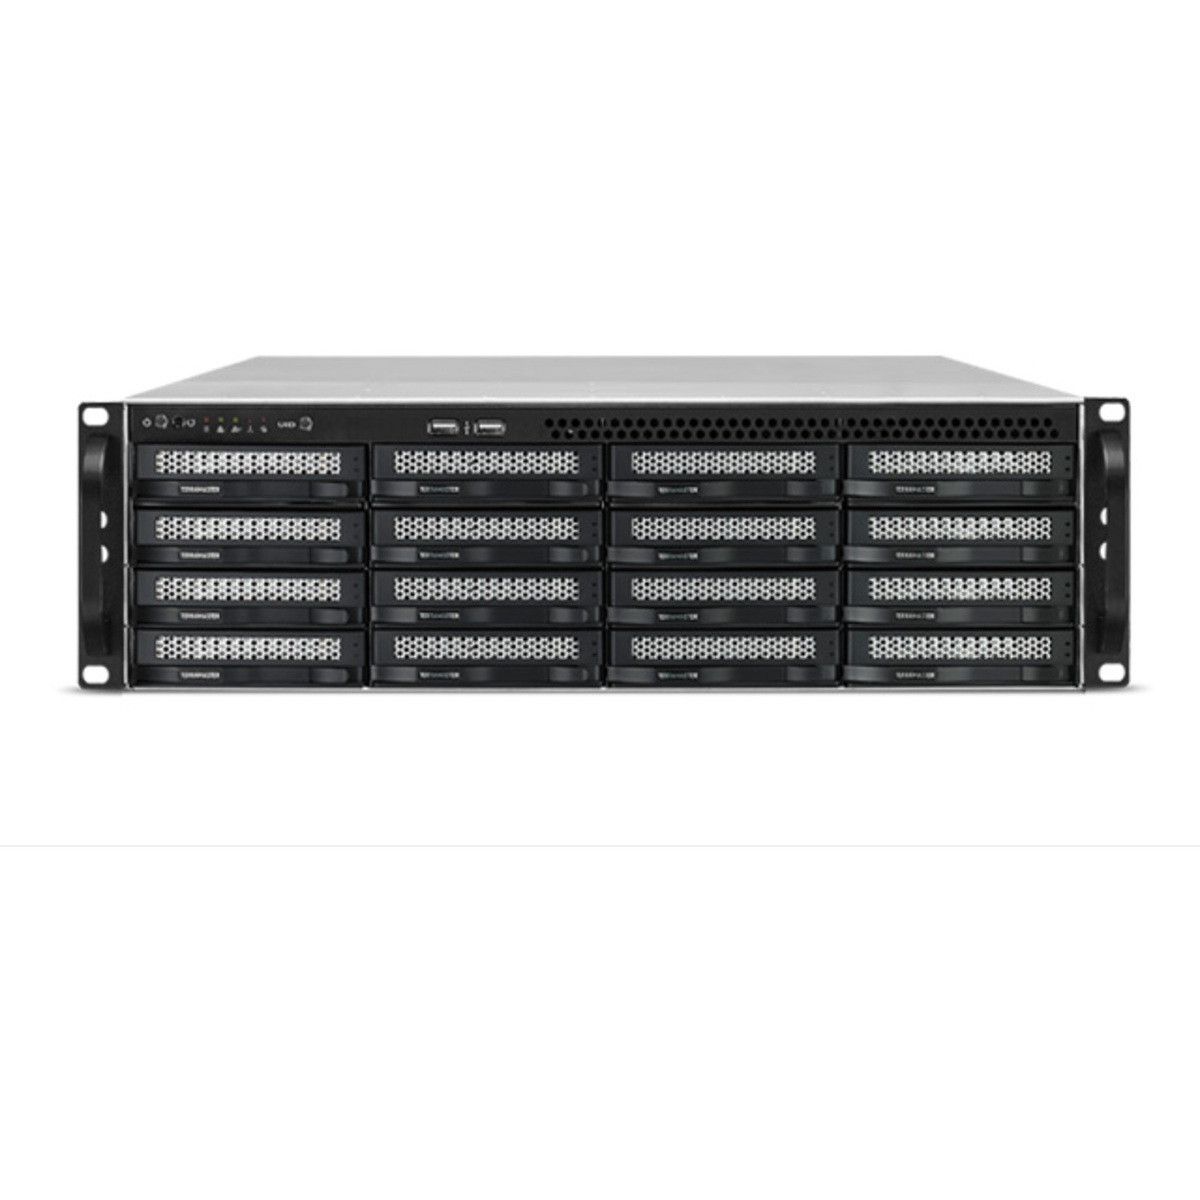 TerraMaster U16-722-2224 104tb 16-Bay RackMount Large Business / Enterprise NAS - Network Attached Storage Device 13x8tb Western Digital Red Pro WD8003FFBX 3.5 7200rpm SATA 6Gb/s HDD NAS Class Drives Installed - Burn-In Tested U16-722-2224